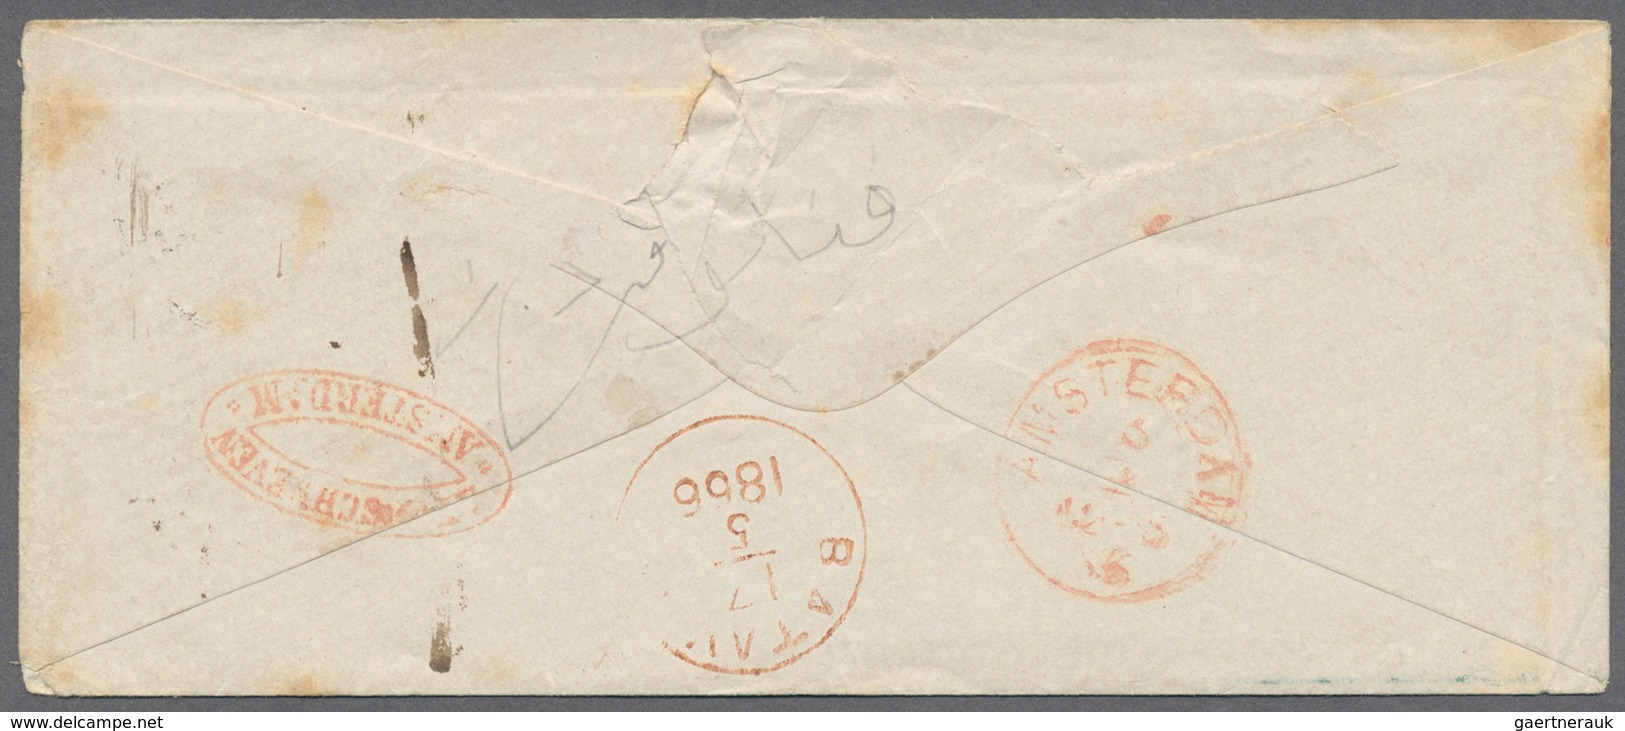 Niederländisch-Indien: 1866, Incoming Mail, Cover From ”Cleve 5 4 66”/Prussia, Originally To Amsterd - Nederlands-Indië